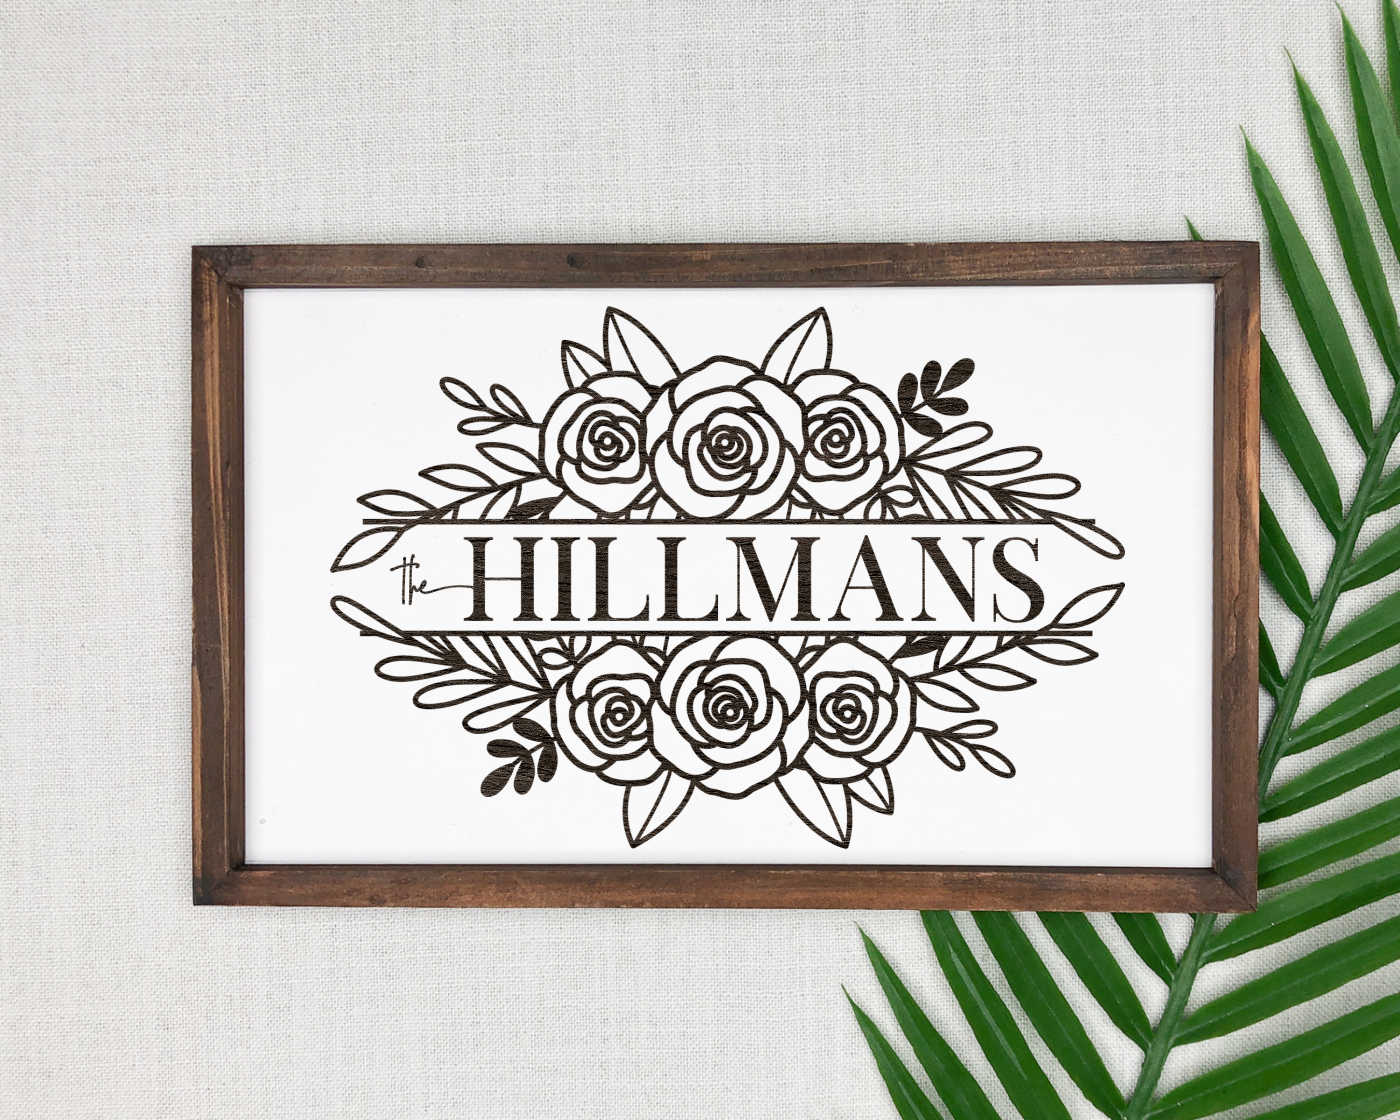 A family name sign in a wooden frame next to a palm branch.